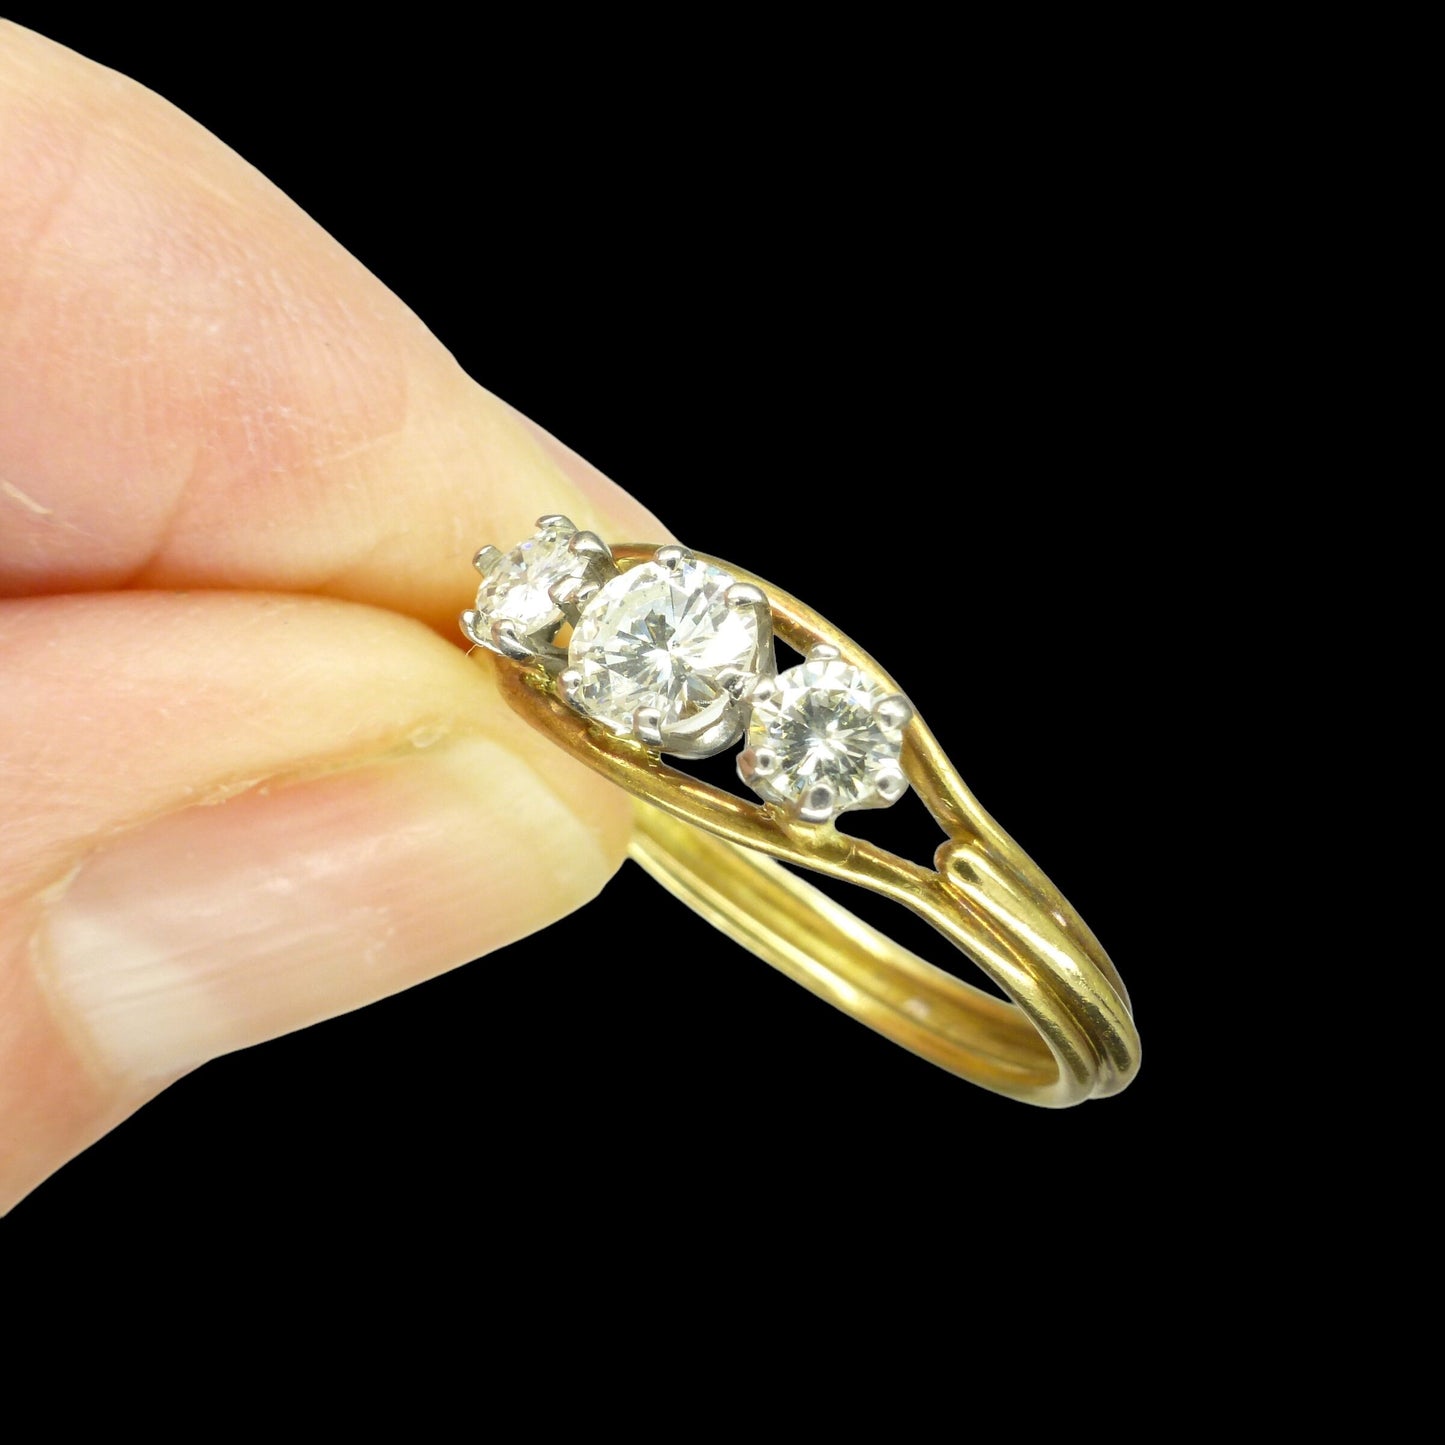 Vintage 18ct gold natural diamond three stone trilogy engagement ring 0.56ct ~ c1950's